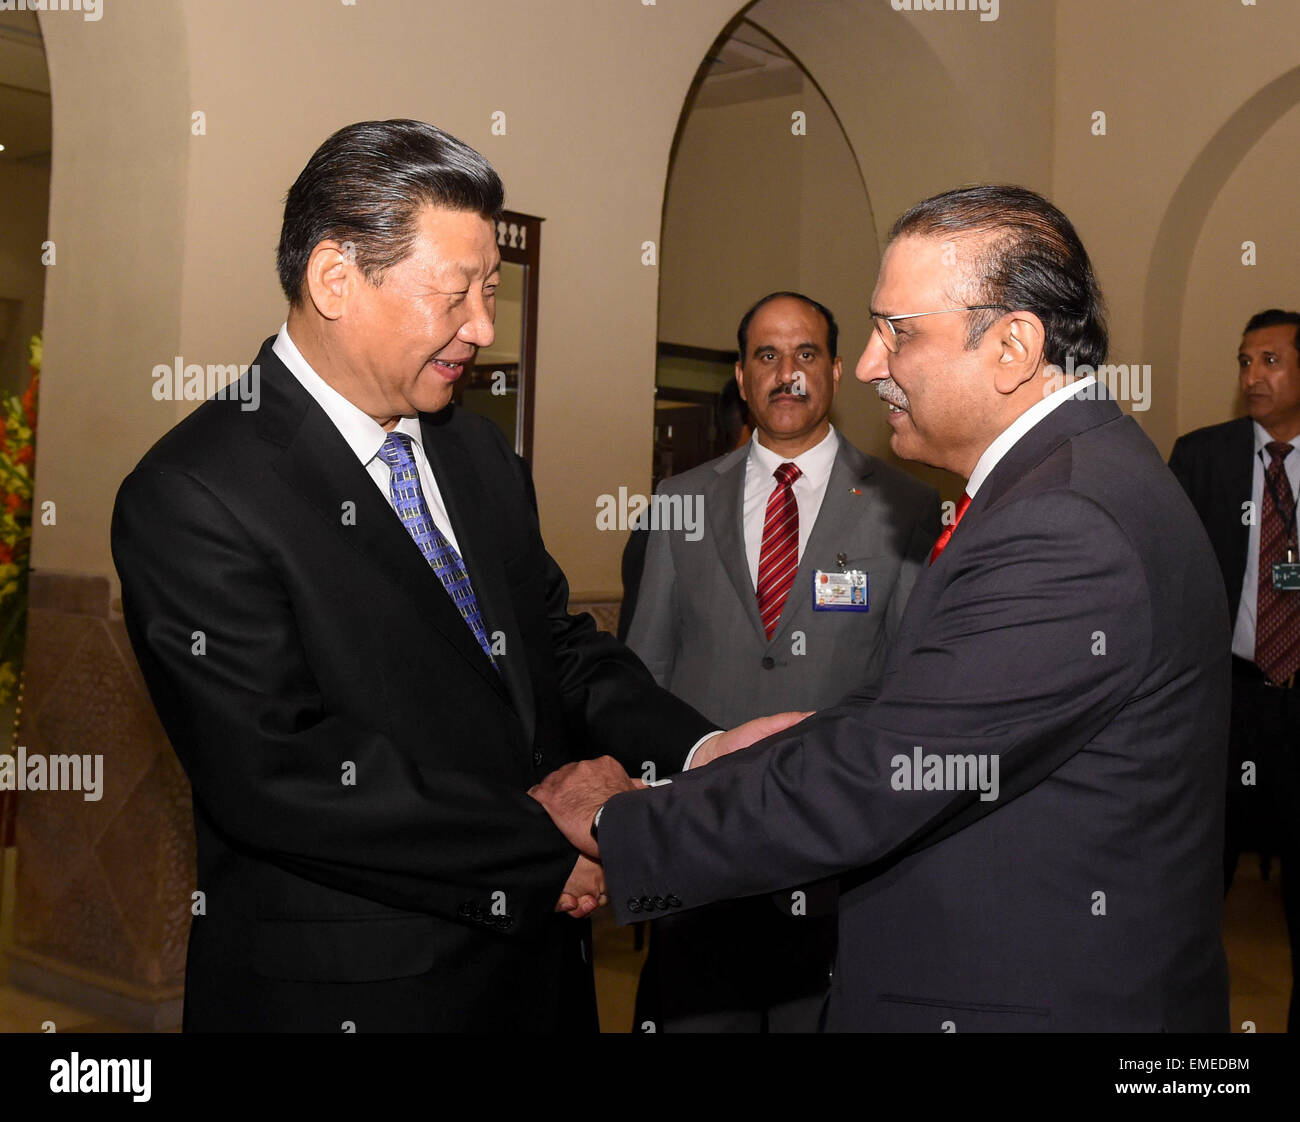 Islamabad, Pakistan. 20th Apr, 2015. Chinese President Xi Jinping (L) shakes hands with Asif Ali Zardari, former Pakistani president and co-chairperson of the Pakistan People's Party (PPP), as he met with leaders of the Pakistani major parties in Islamabad, capital of Pakistan, April 20, 2015. © Li Xueren/Xinhua/Alamy Live News Stock Photo